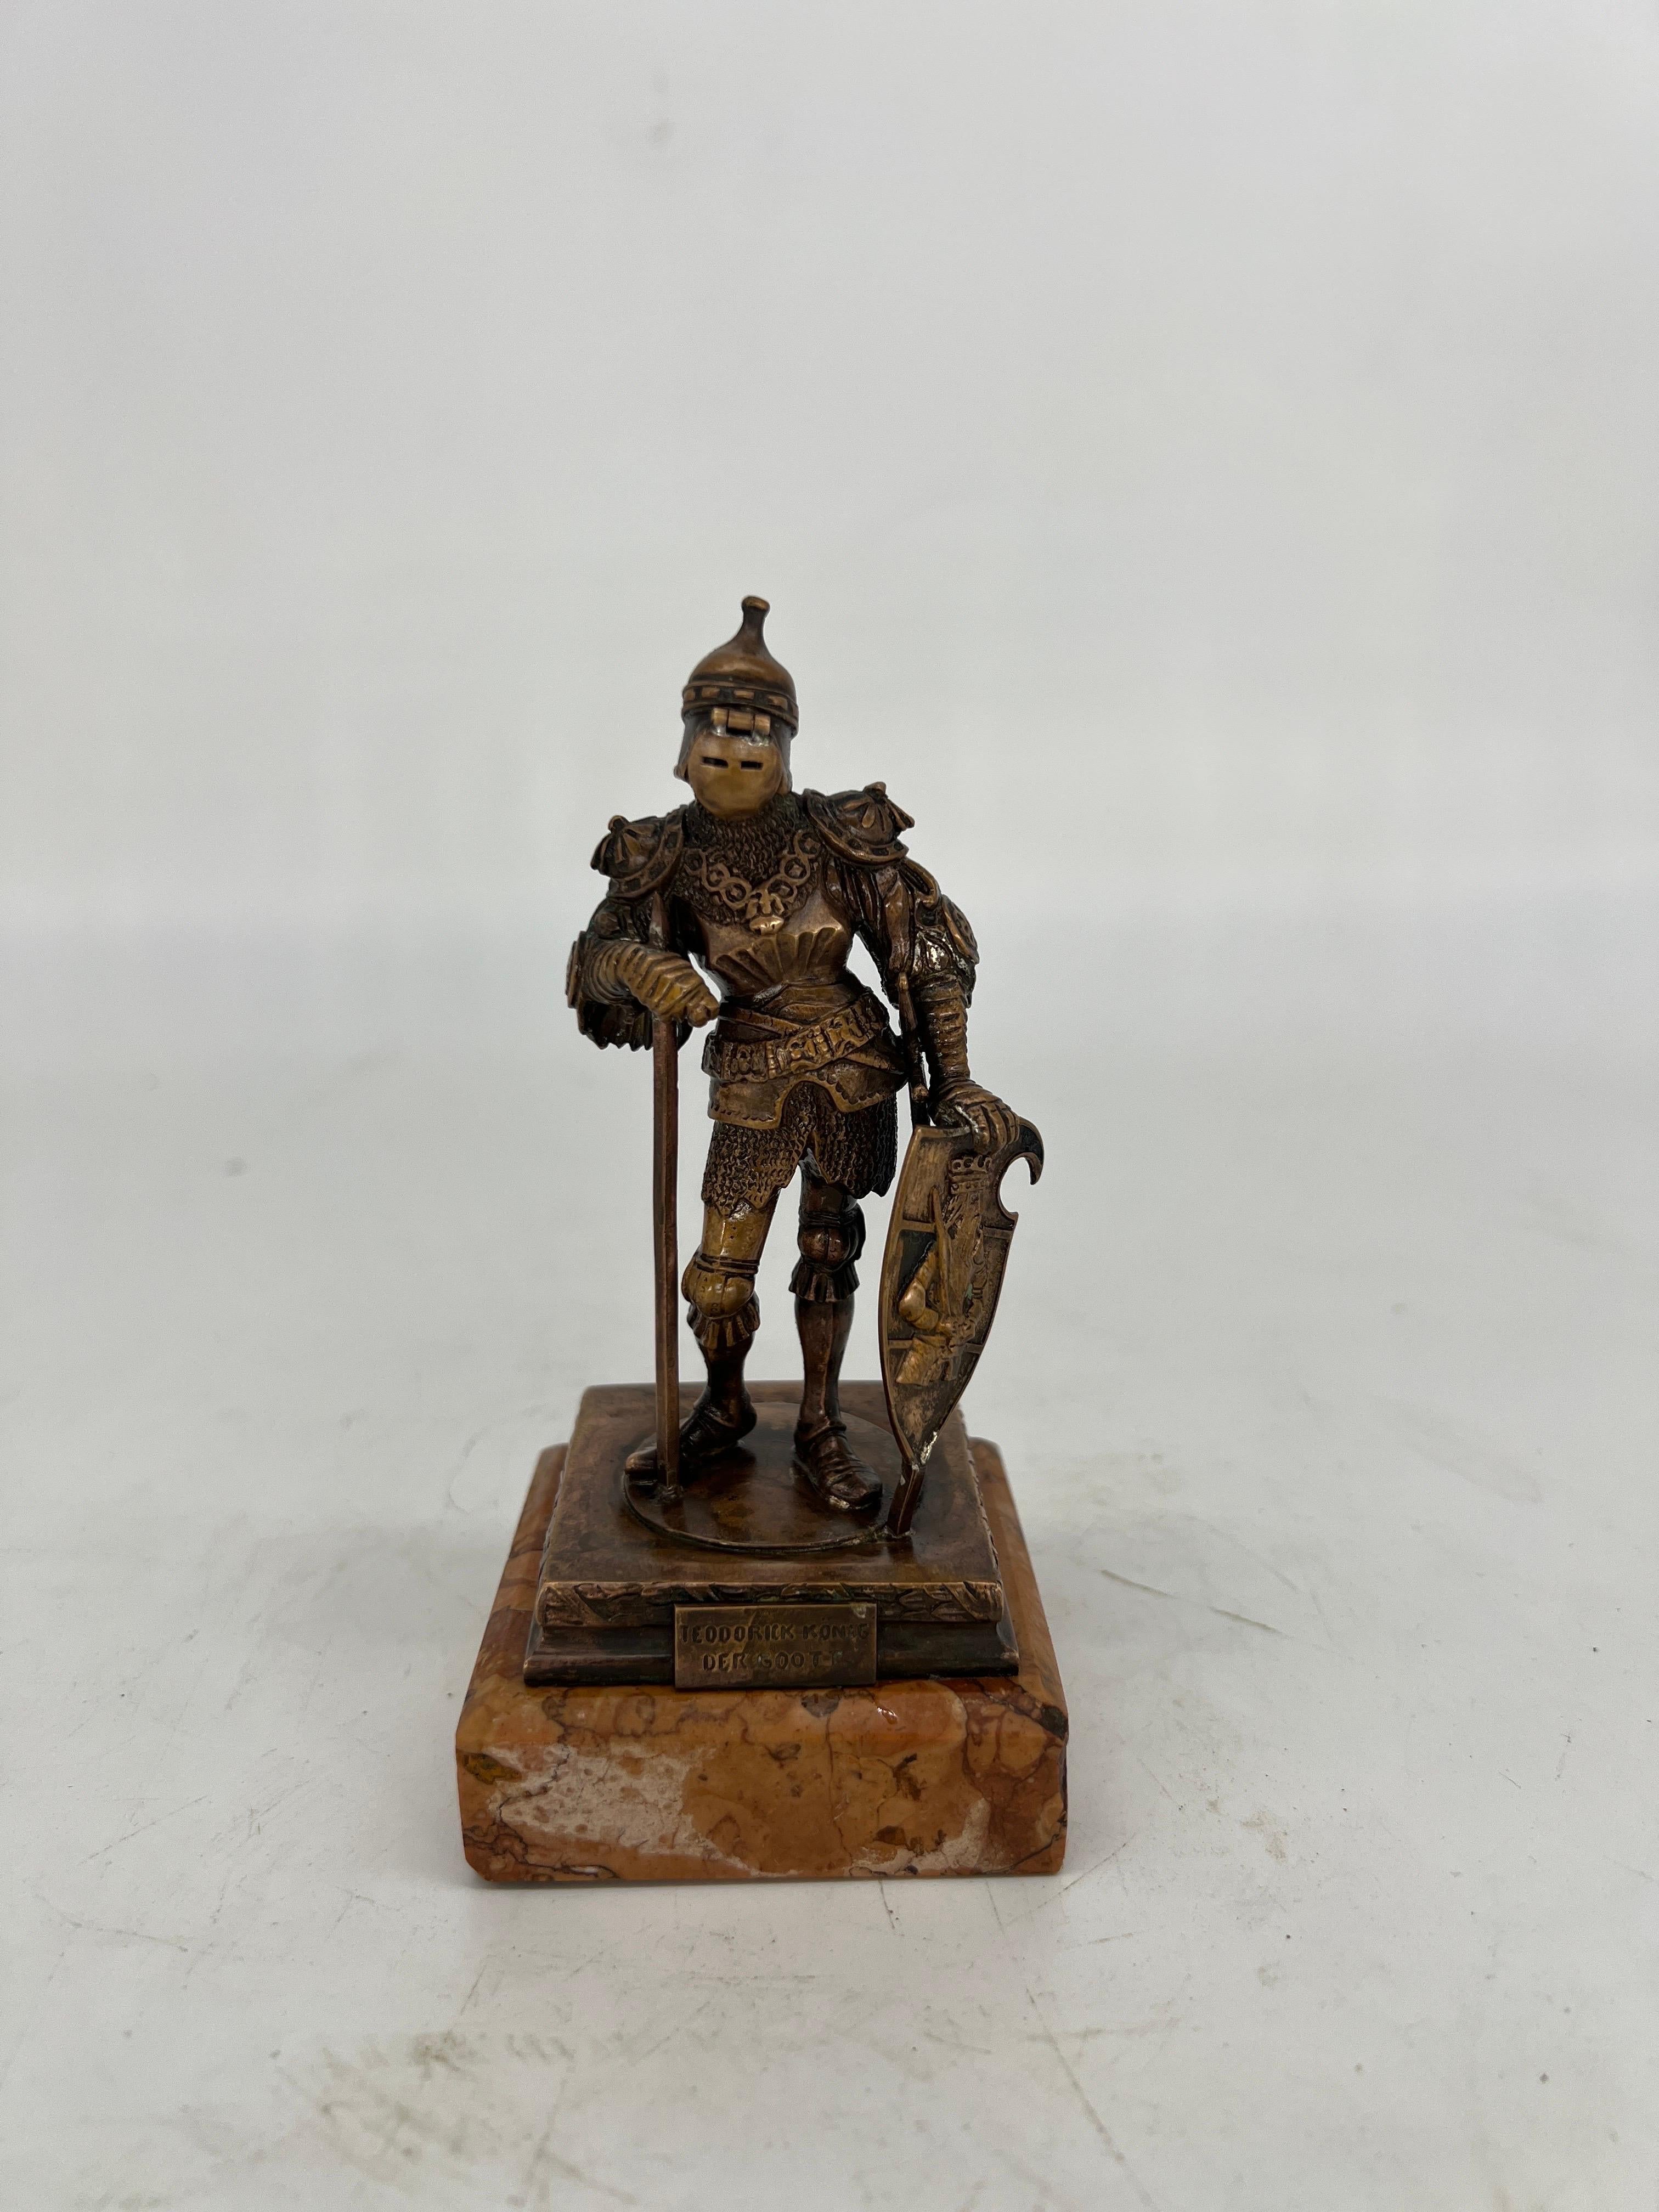 After Peter Vischer The Elder (1460-1529), Theodoric The Great, King of the Ostrogoths.

Continental Bronze Figure of Gothic King Theodoric as a knight in armor after the artist Peter Vischer, the king shown as a standing knight, wearing armor and